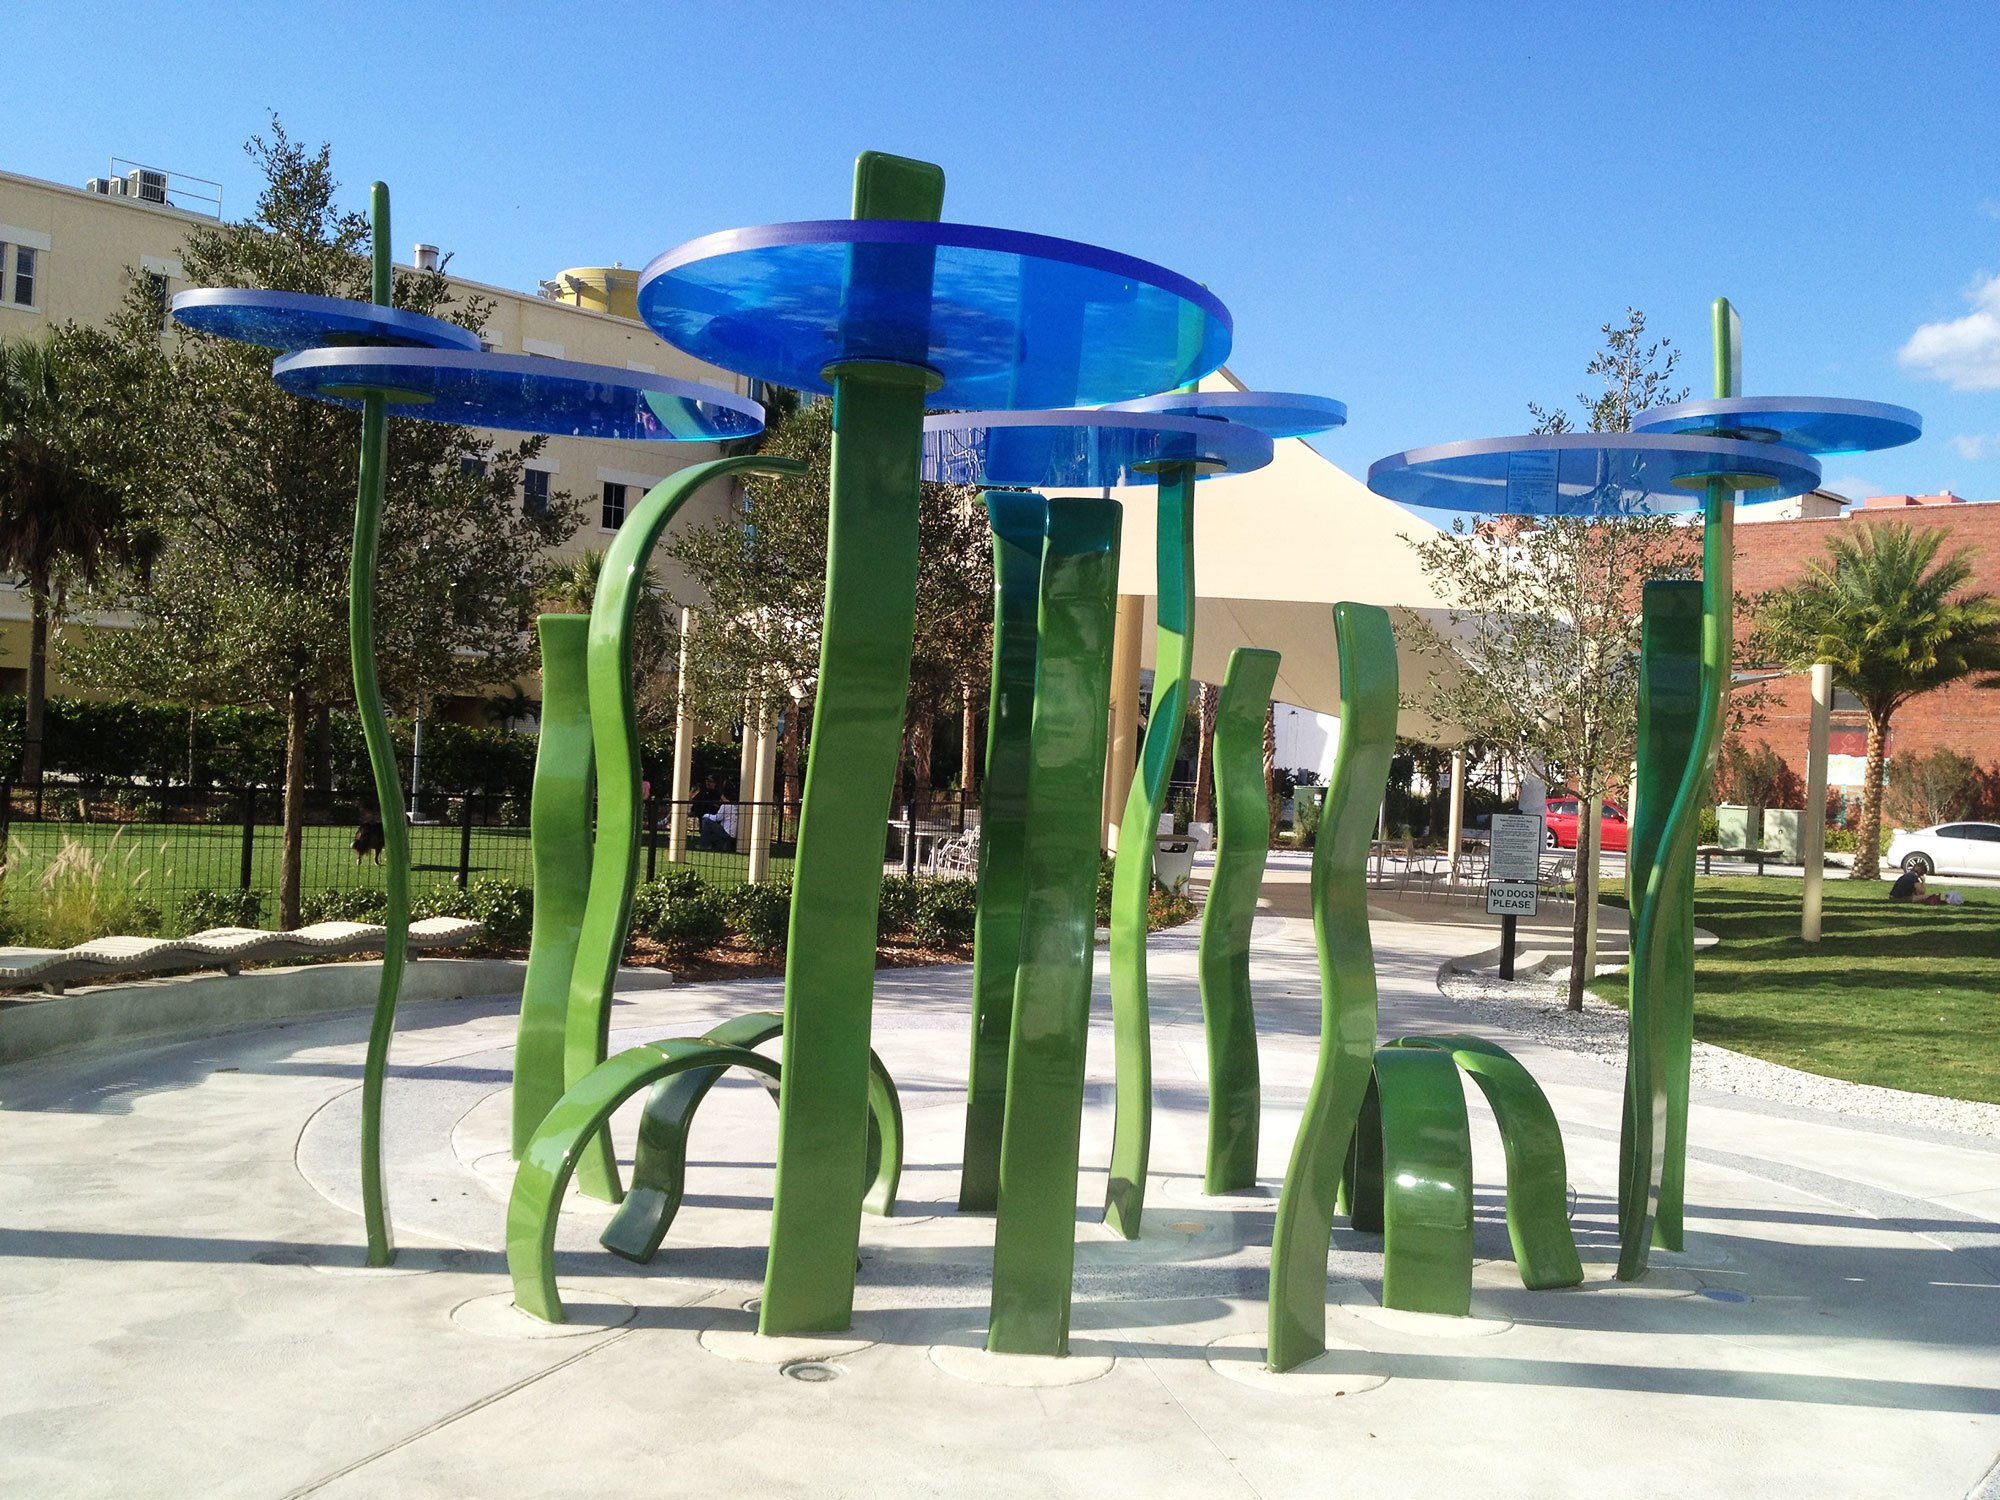 Community Art Installation in Florida with green ribbon-like wavy poles topped with blue acrylic discs.